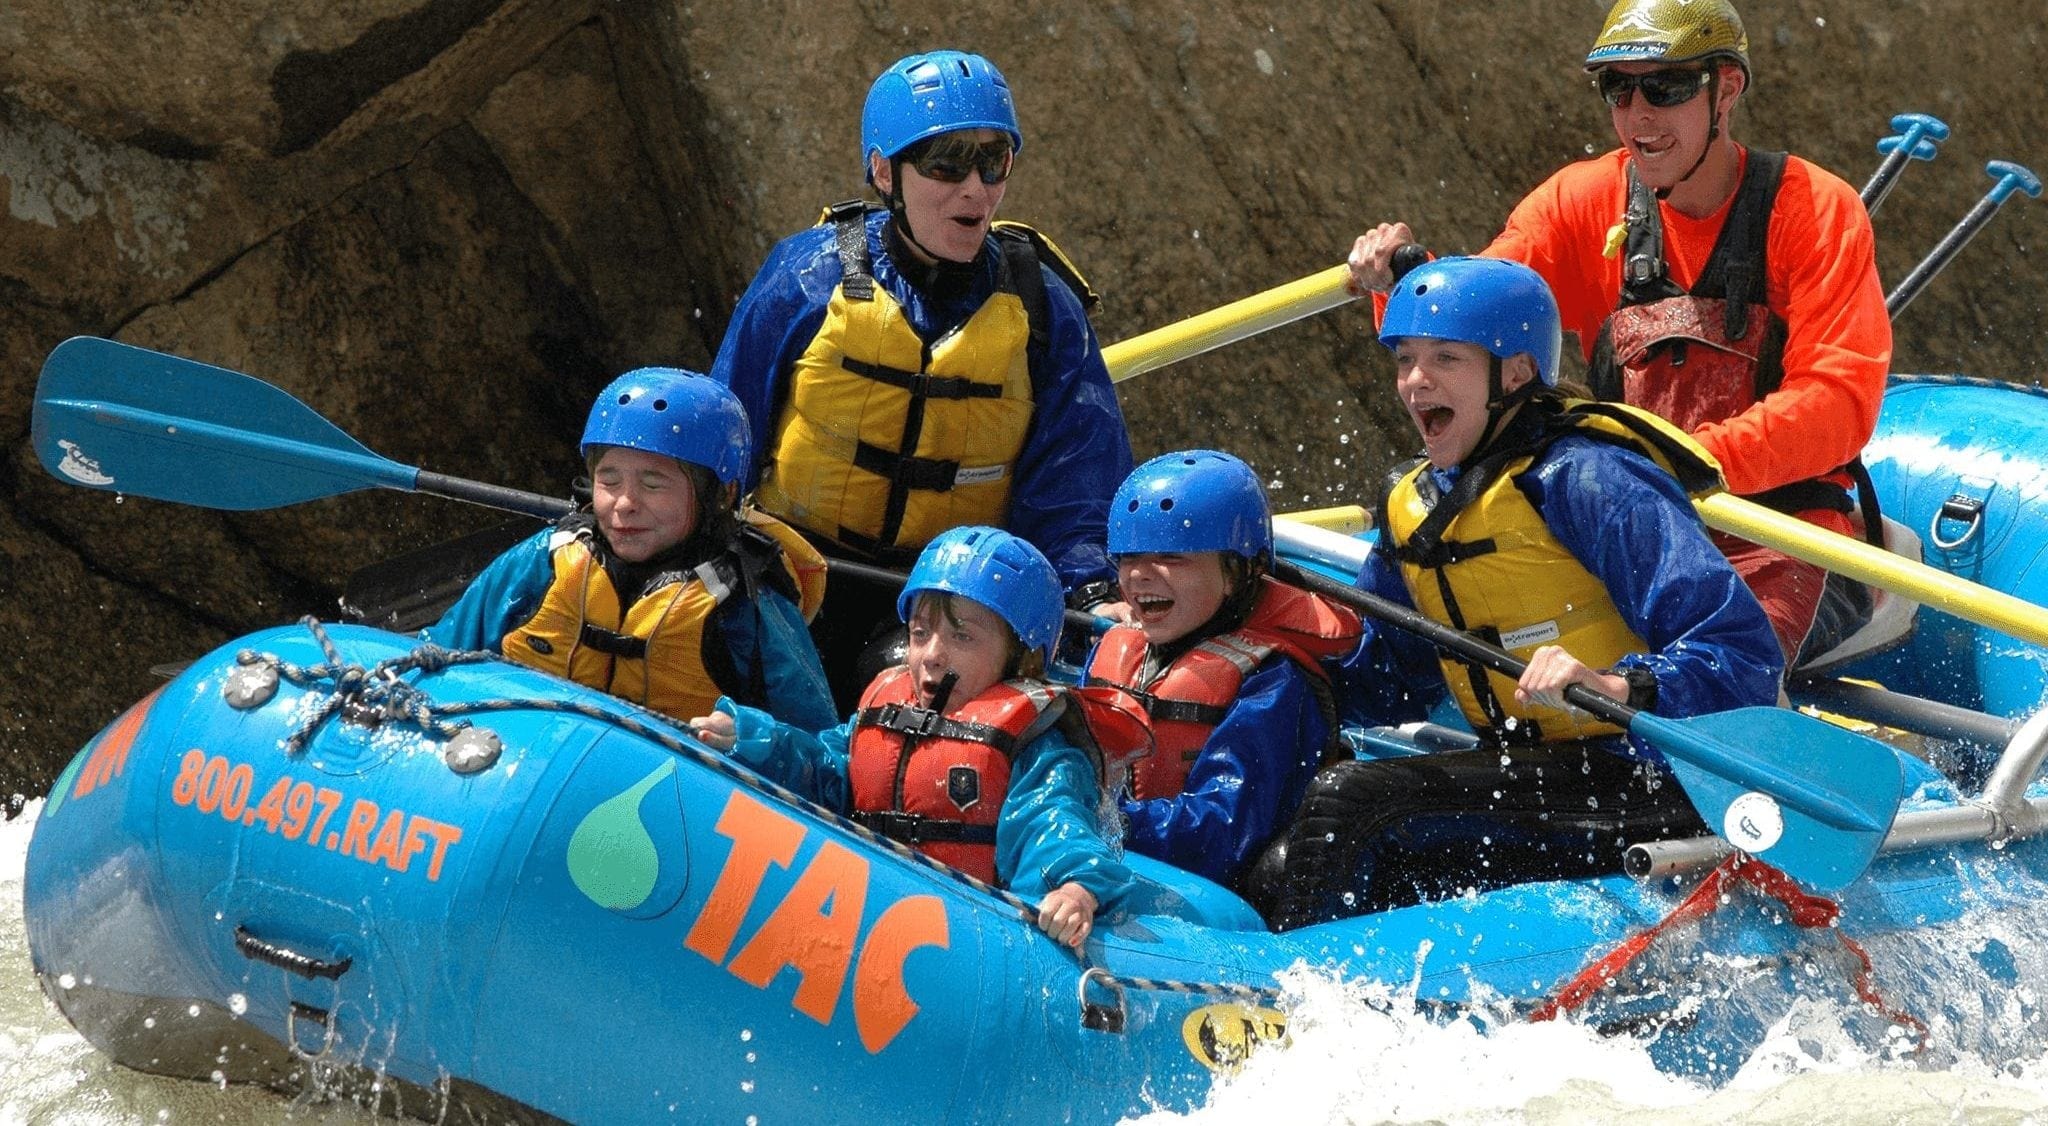 Rafting with parents and kids in the Blue River in Colorado